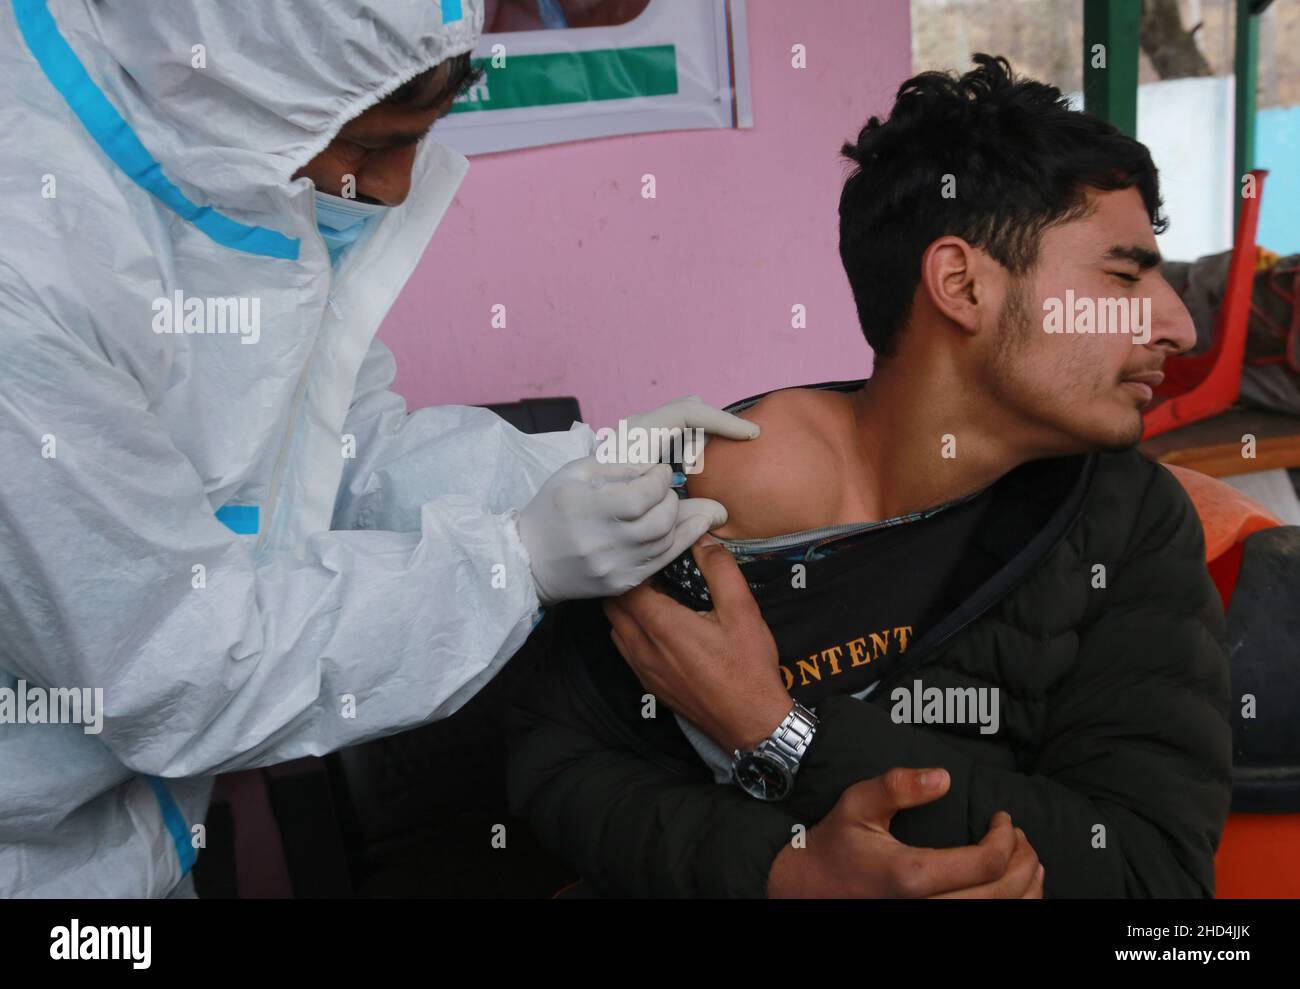 January 3, 2022, Srinagar, Jammu and Kashmir, India: A boy reacts as he receives a dose of Bharat Biotech's coronavirus disease (COVID-19) vaccine, Covaxin, during a vaccination drive for children aged 15-18 years in Srinagar, Indian-Kashmir. (Credit Image: © Sajad HameedZUMA Press Wire) Stock Photo